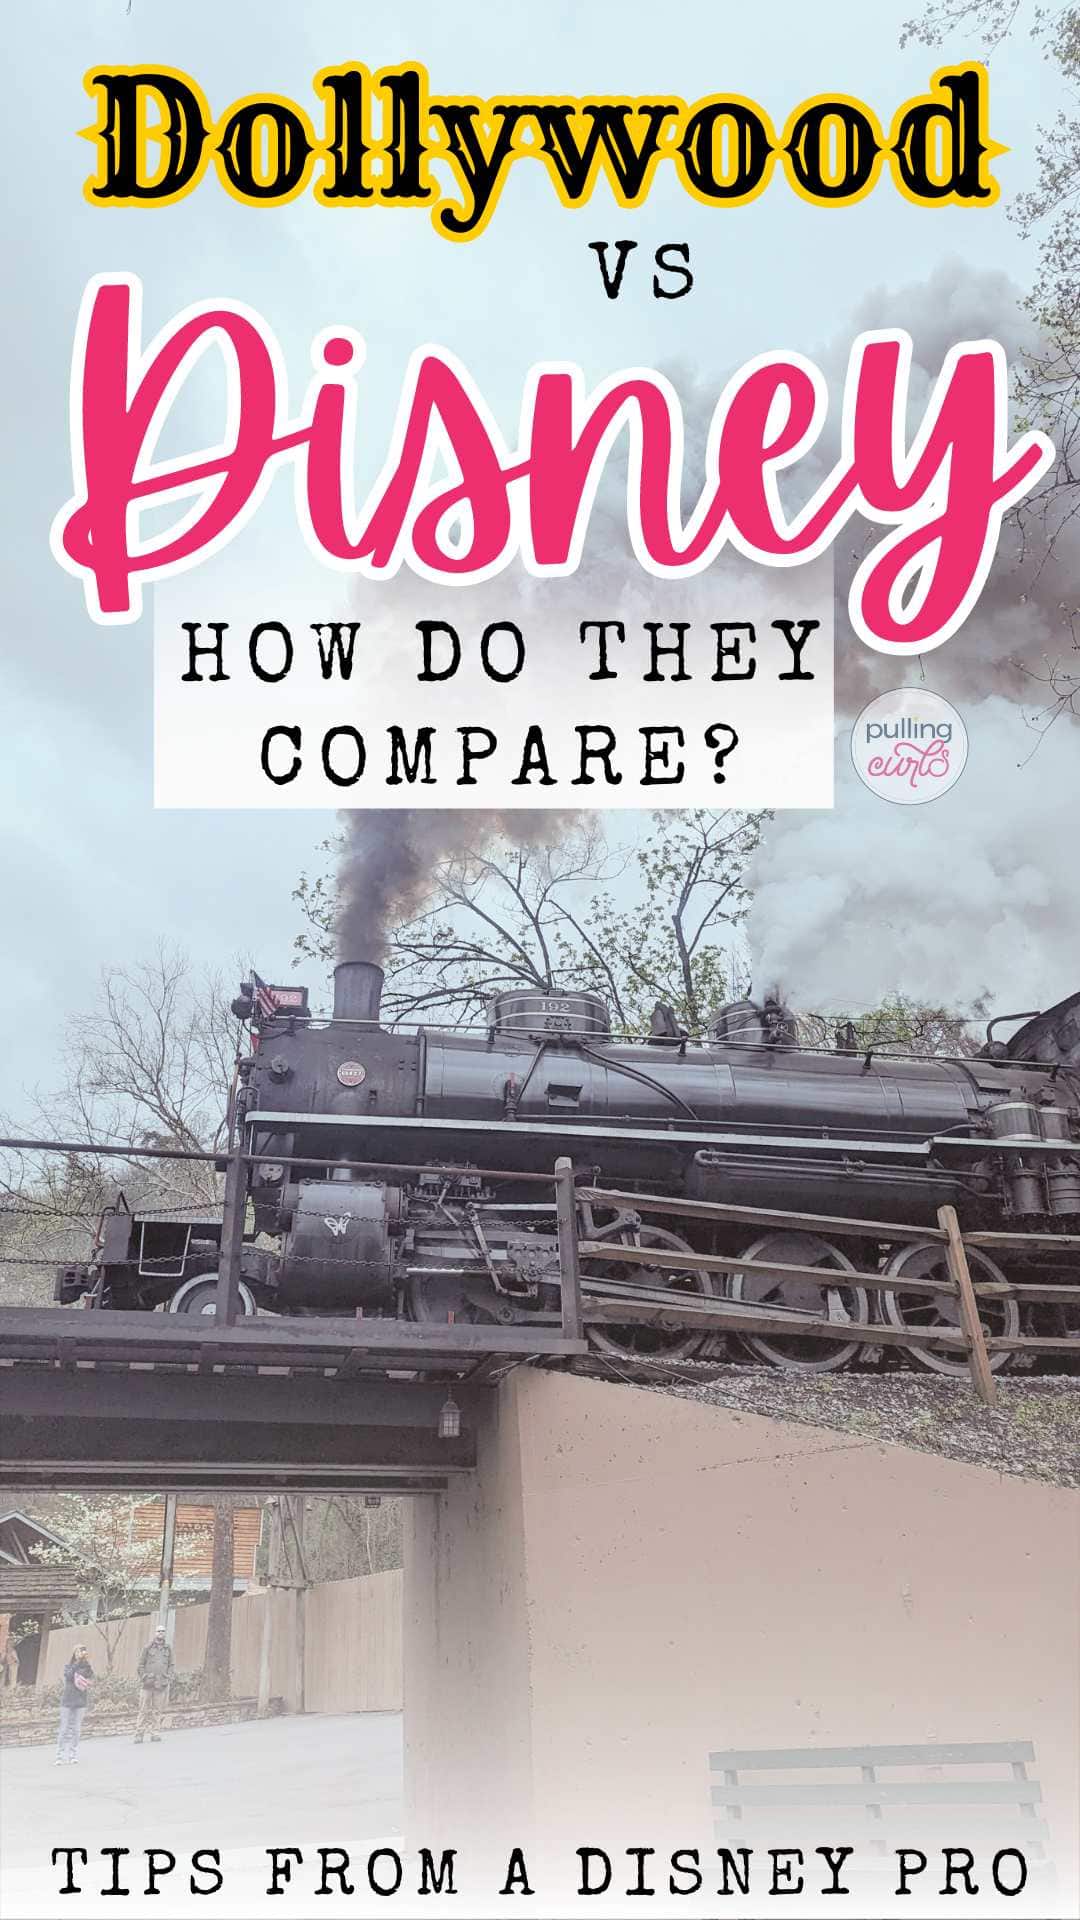 Dollywood train photo // Dollywood vs Disney -- how do they compare from a Disney pro via @pullingcurls